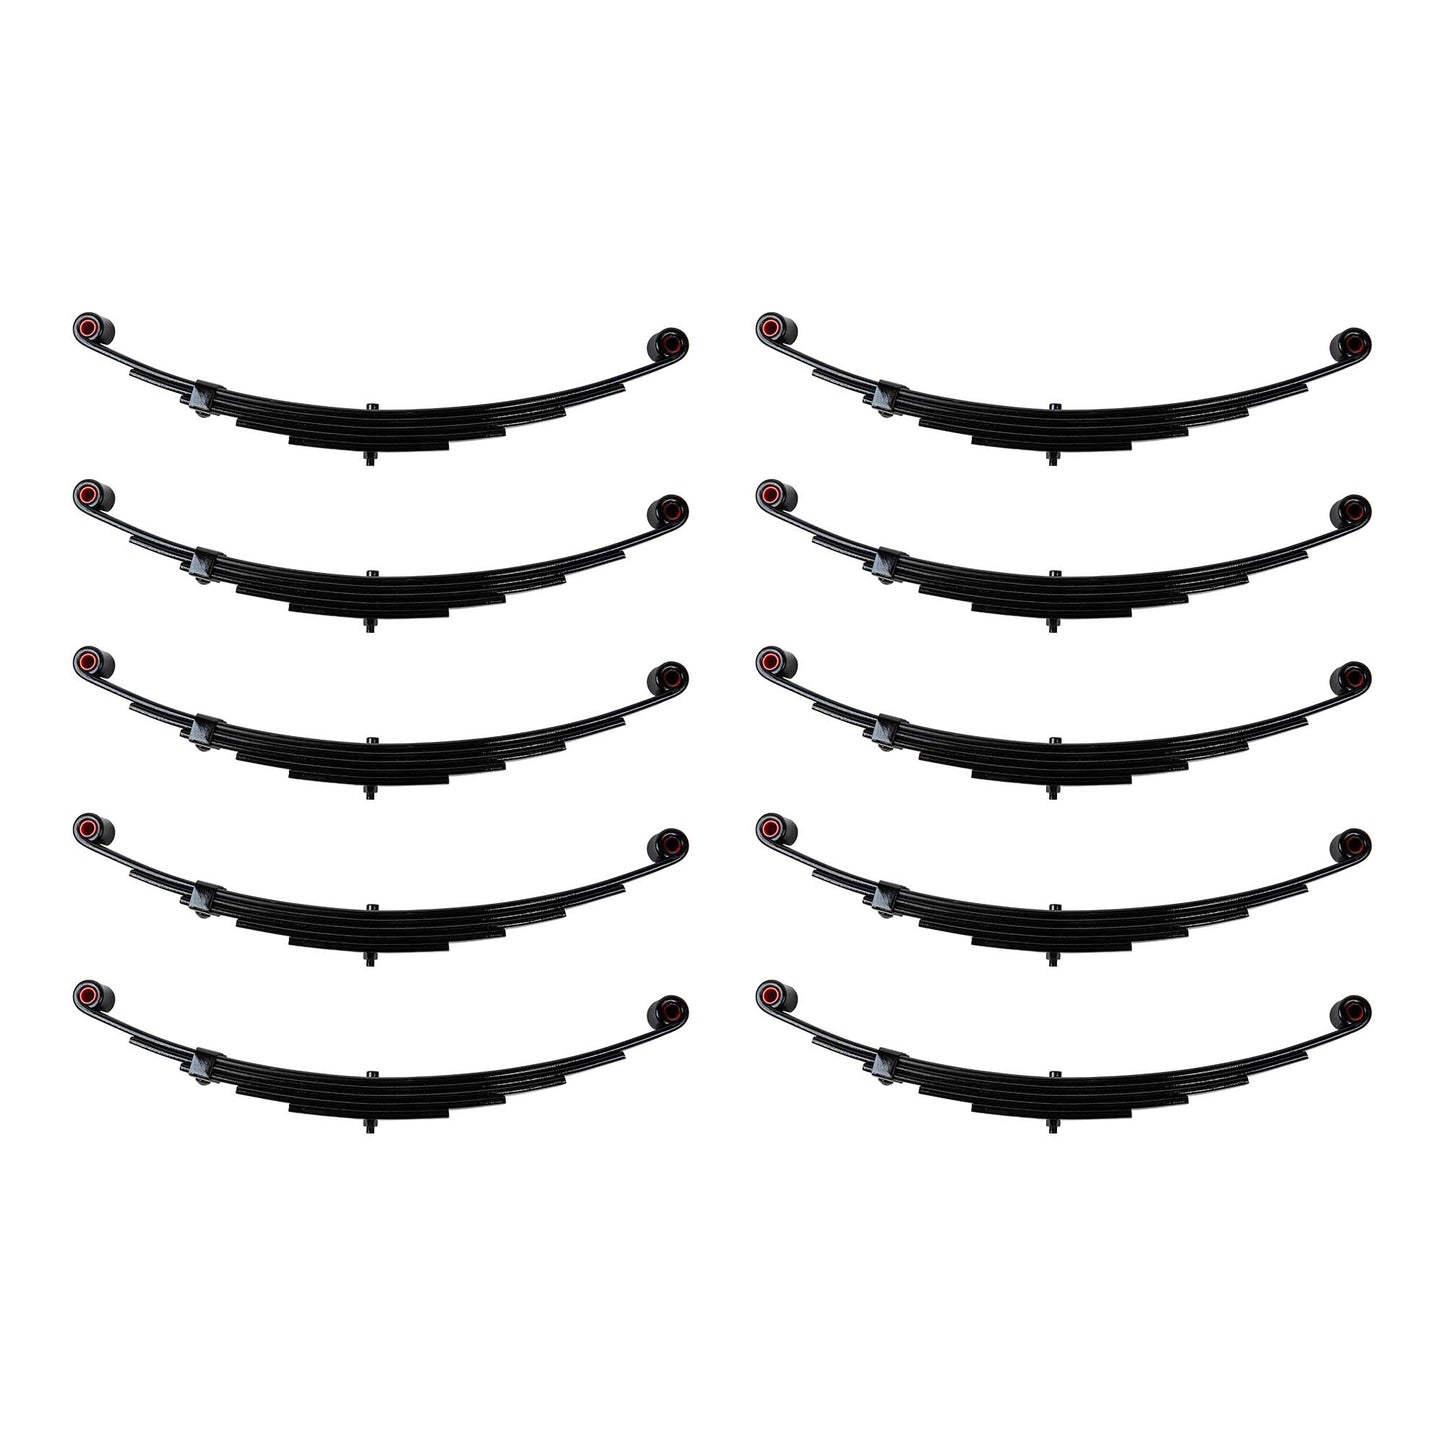 10 pack - 5 Leaf 25 1/4" x 1 3/4" Trailer Double Eye Spring for 6000 lb Axles